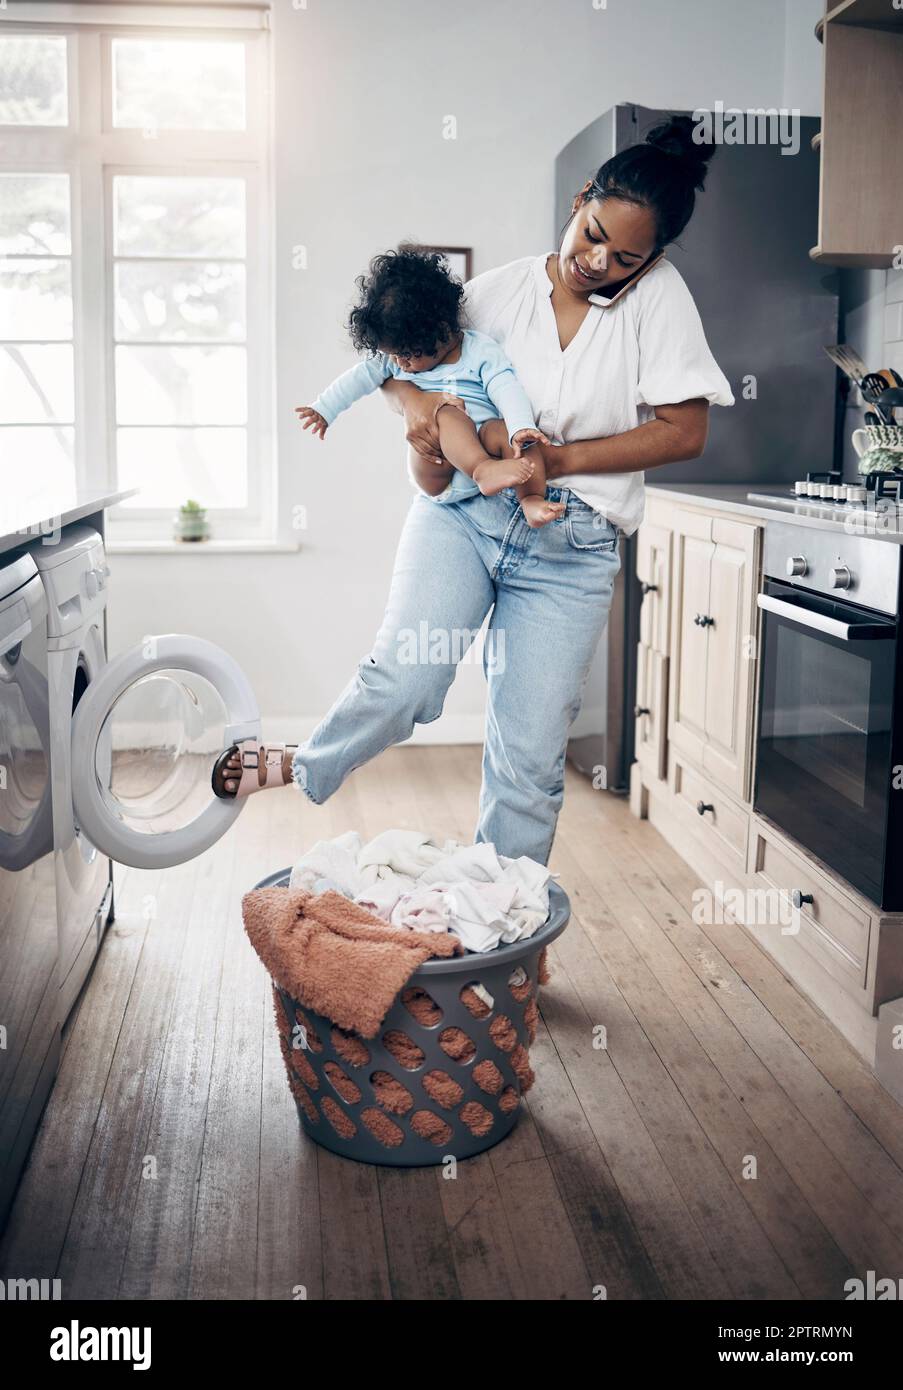 Babys laundry cannot wait. a young mother using a cellphone while completing housework and holding her baby at home Stock Photo